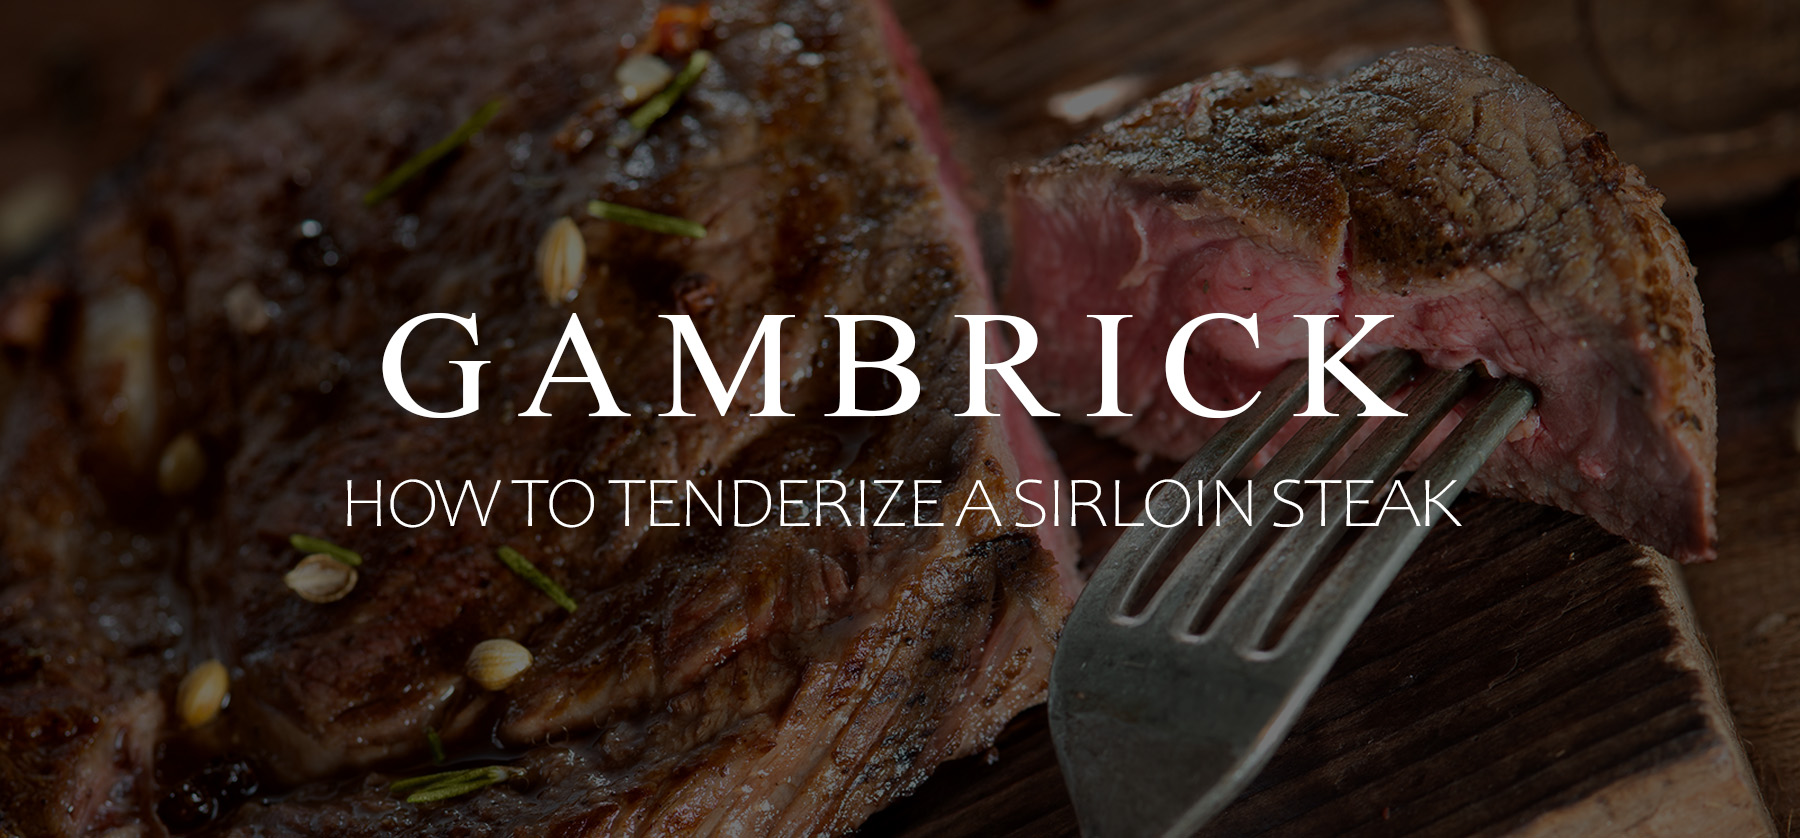 how to tenderize a sirloin steak for grilling